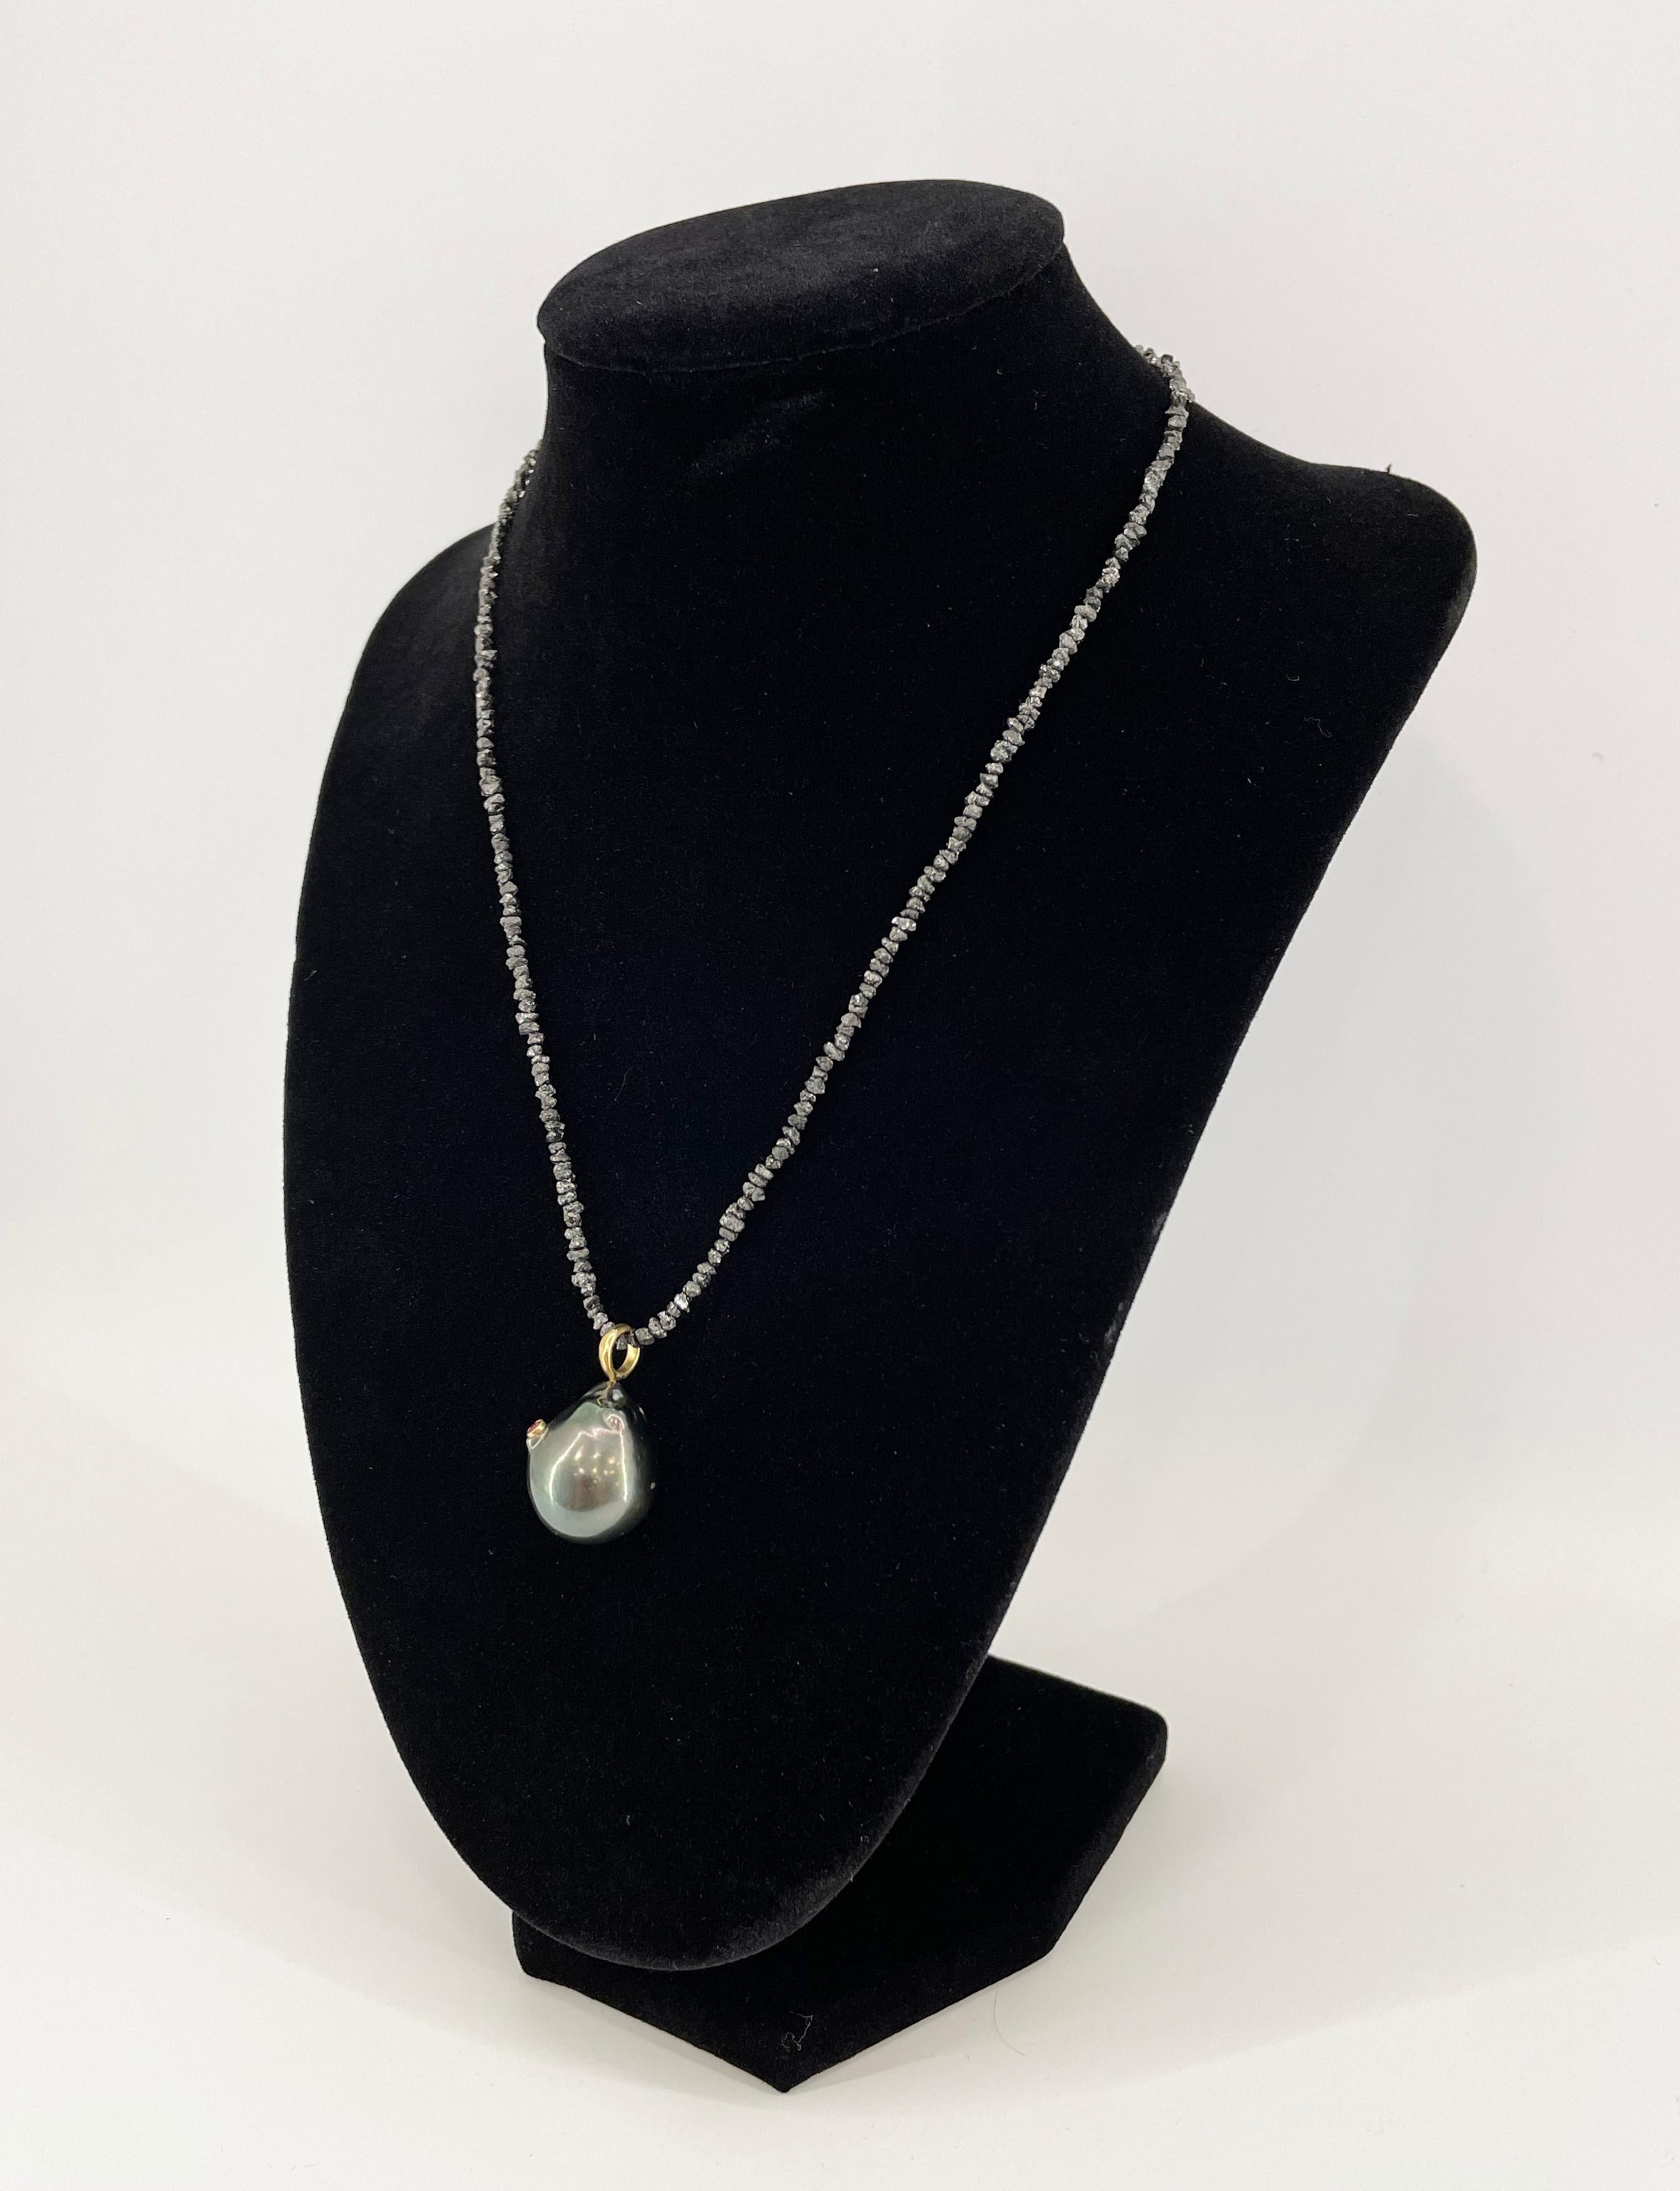 This handcrafted necklace is an impressive piece of art. 
A dark baroque pearl decorated with gold and sapphire, set in a necklace of uncut diamonds, will envelop its owner with exclusive luxury.

The baroque pearl and uncut diamonds' collar give